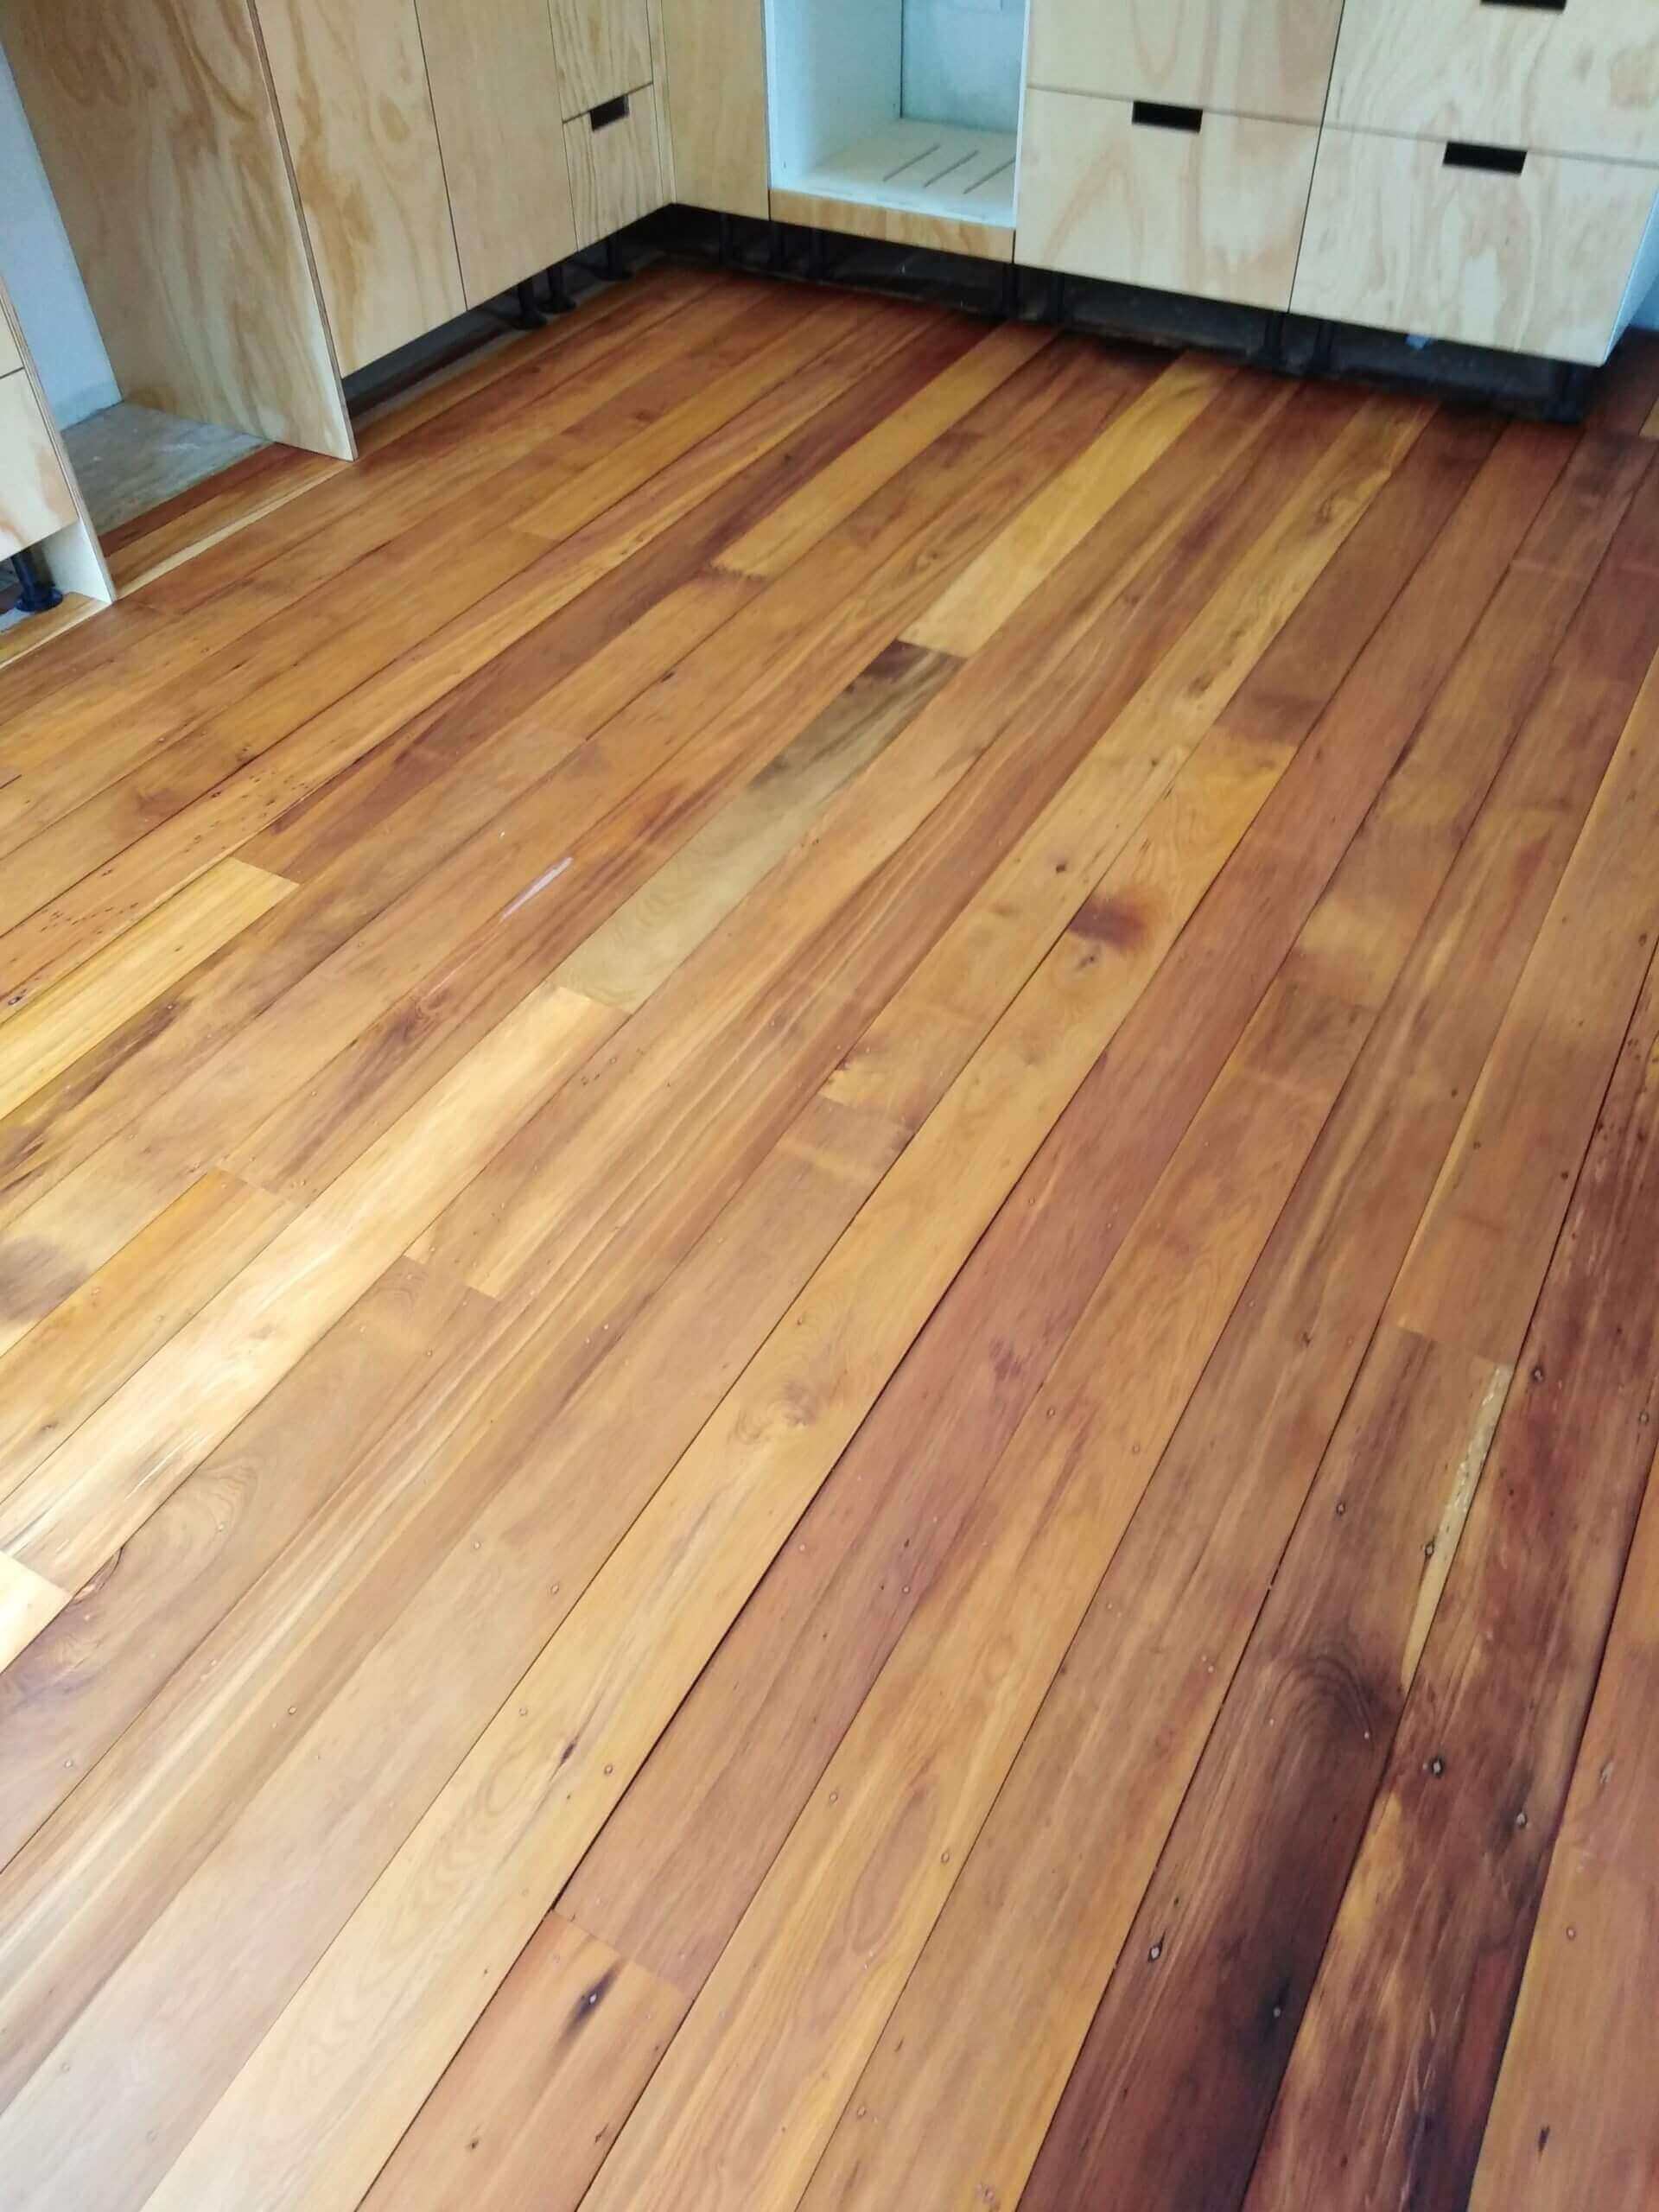 Timber Floor Sanding And Finishing